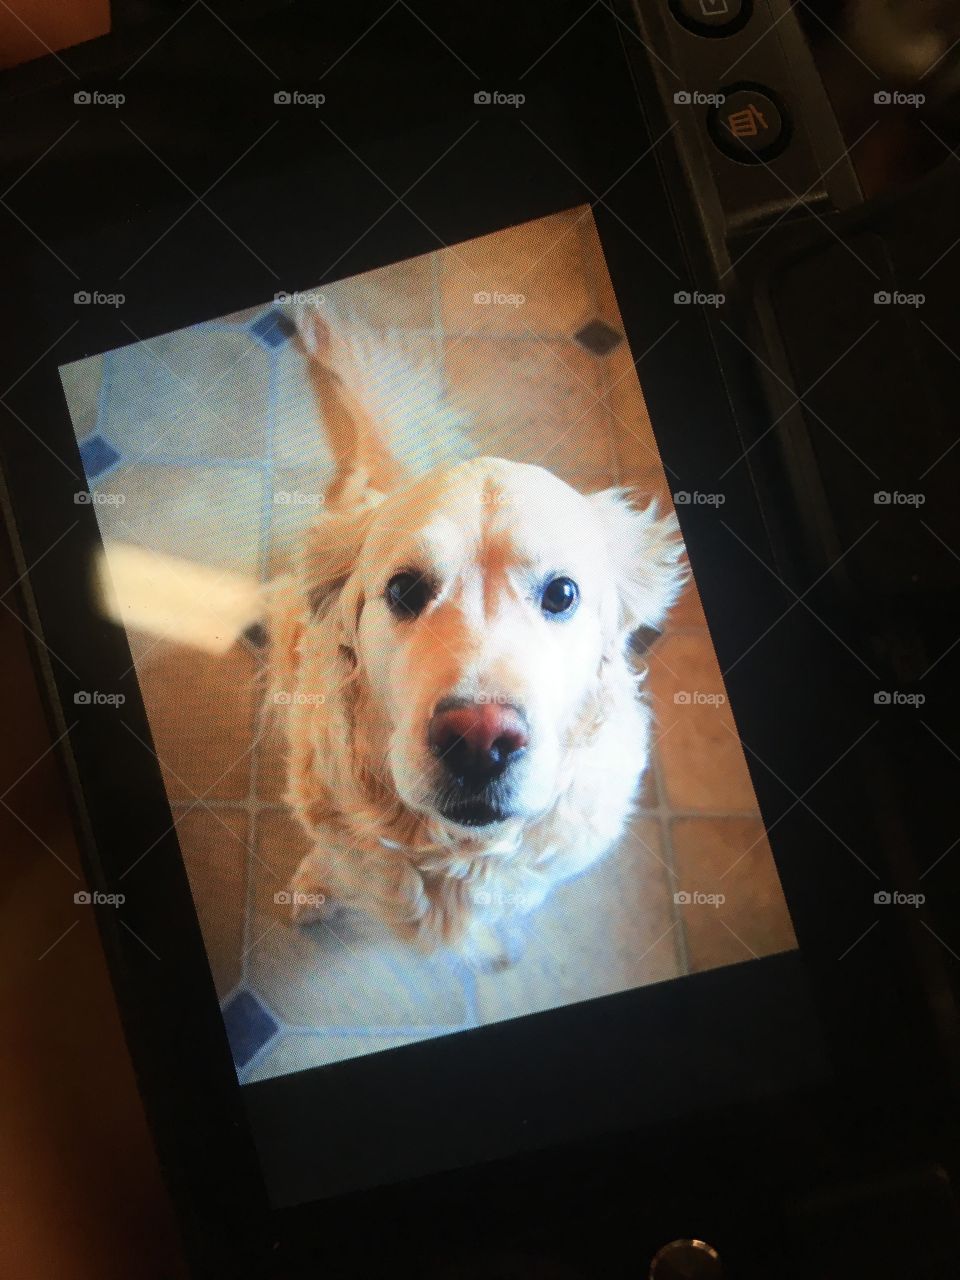 What a cutie! Photo taken from the cameras screen. Photographed dog golden retriever.